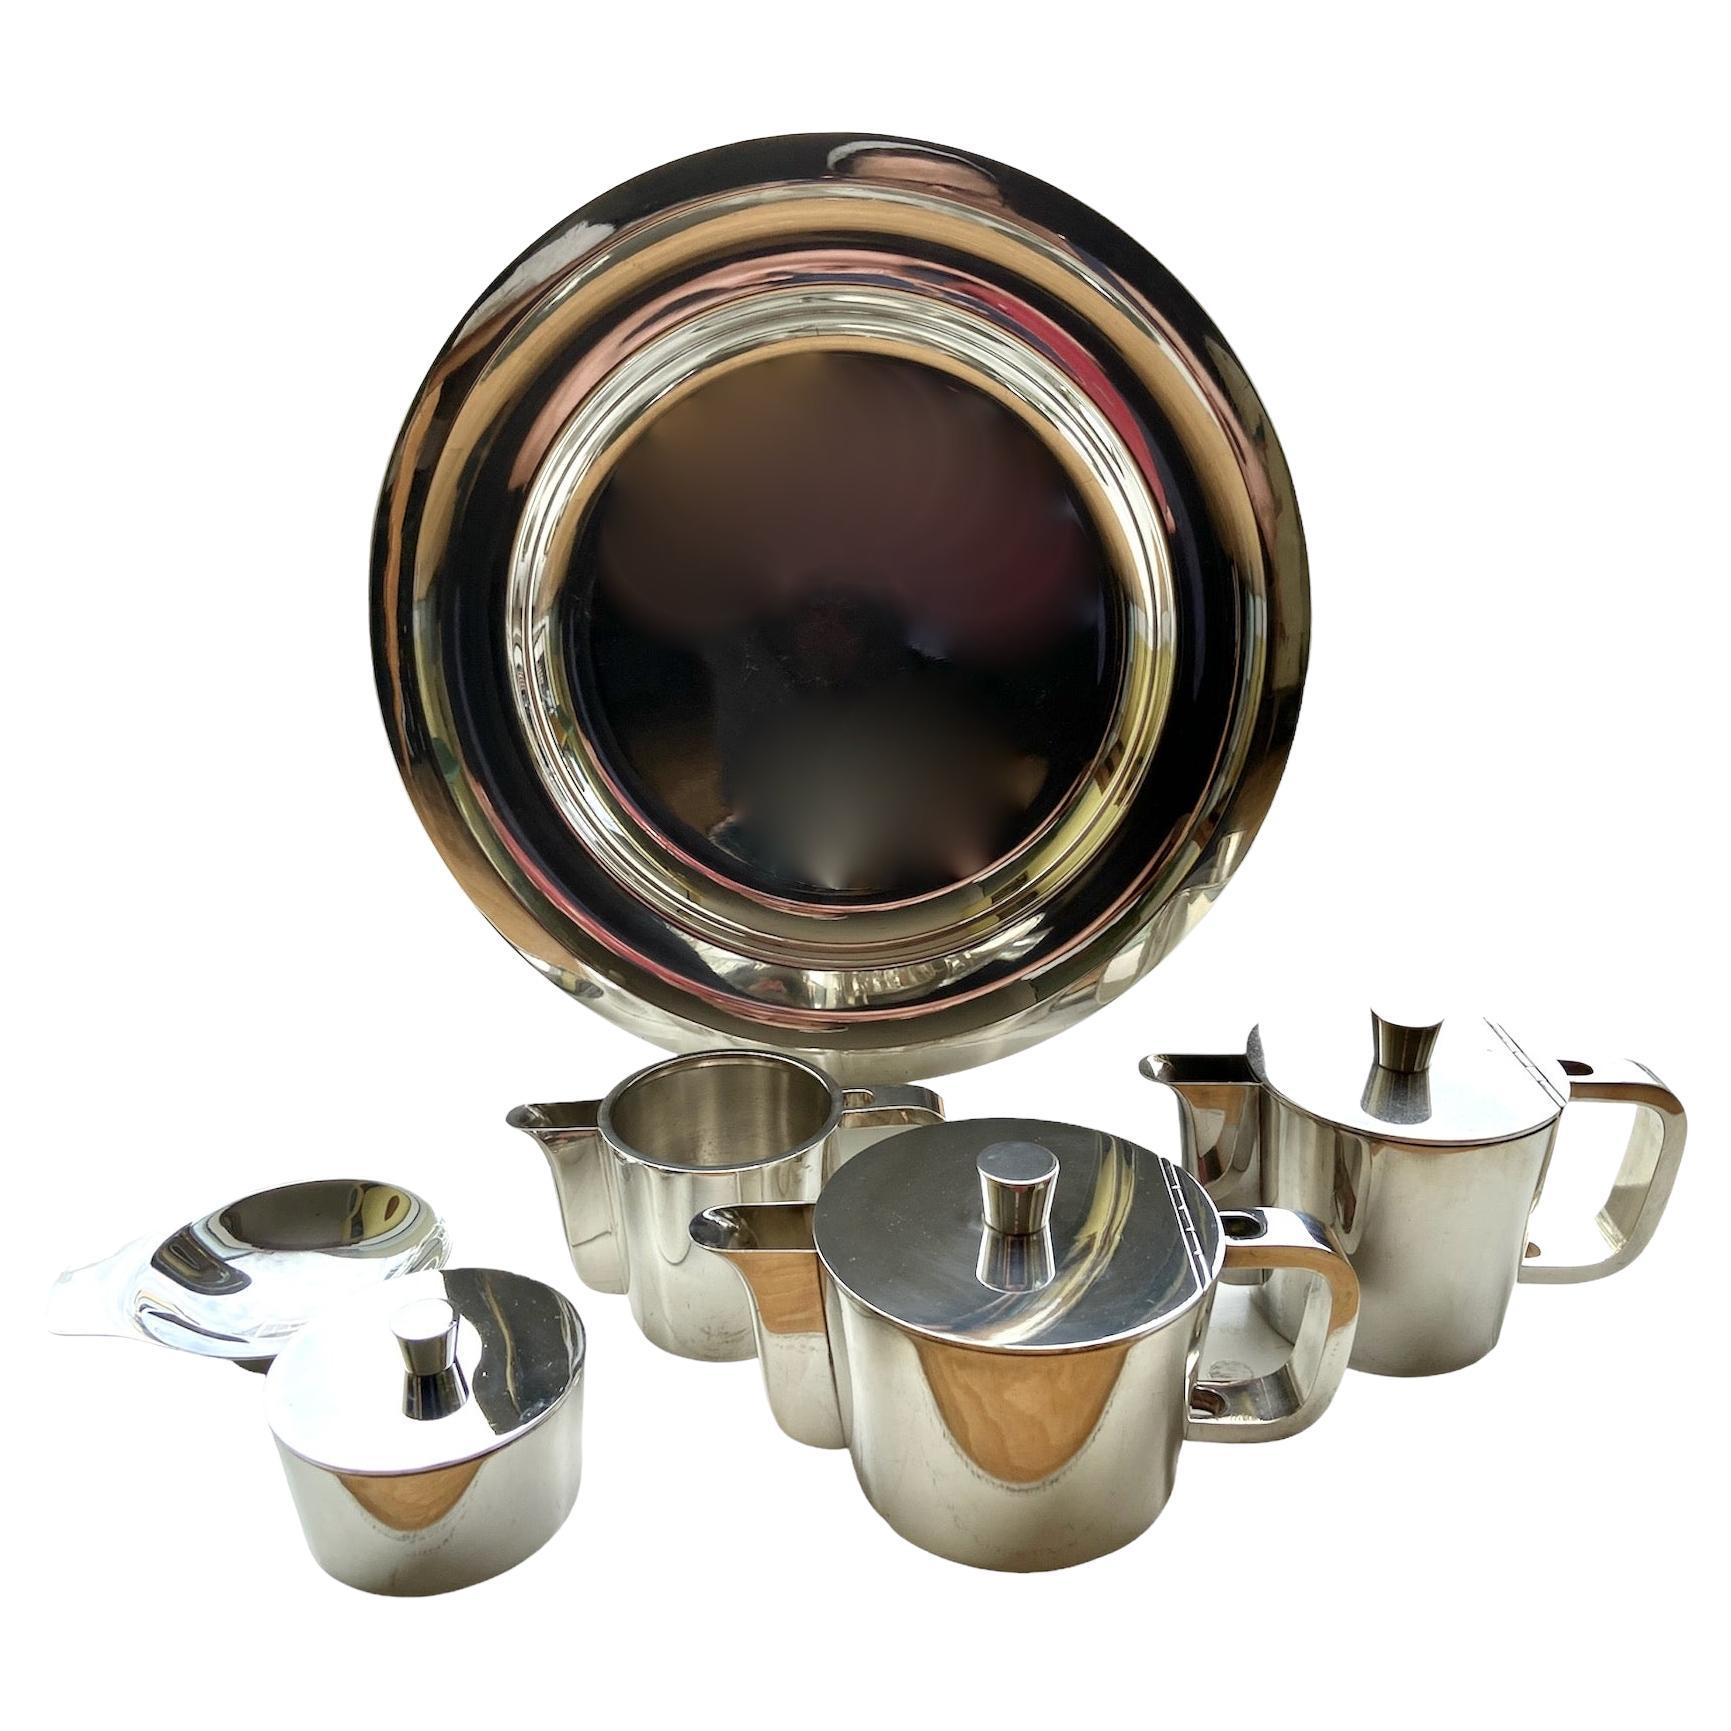 A Gio Ponti 6 piece mid-century silver plated coffee and tea set on a small circular tray. Designed for the VI triennale, 1930's to 1950's.
comprising 6 items
a 50CL tea pot, (seems unused).
a 35CL coffee pot, (seems unused).
a 25CL cold milk/water